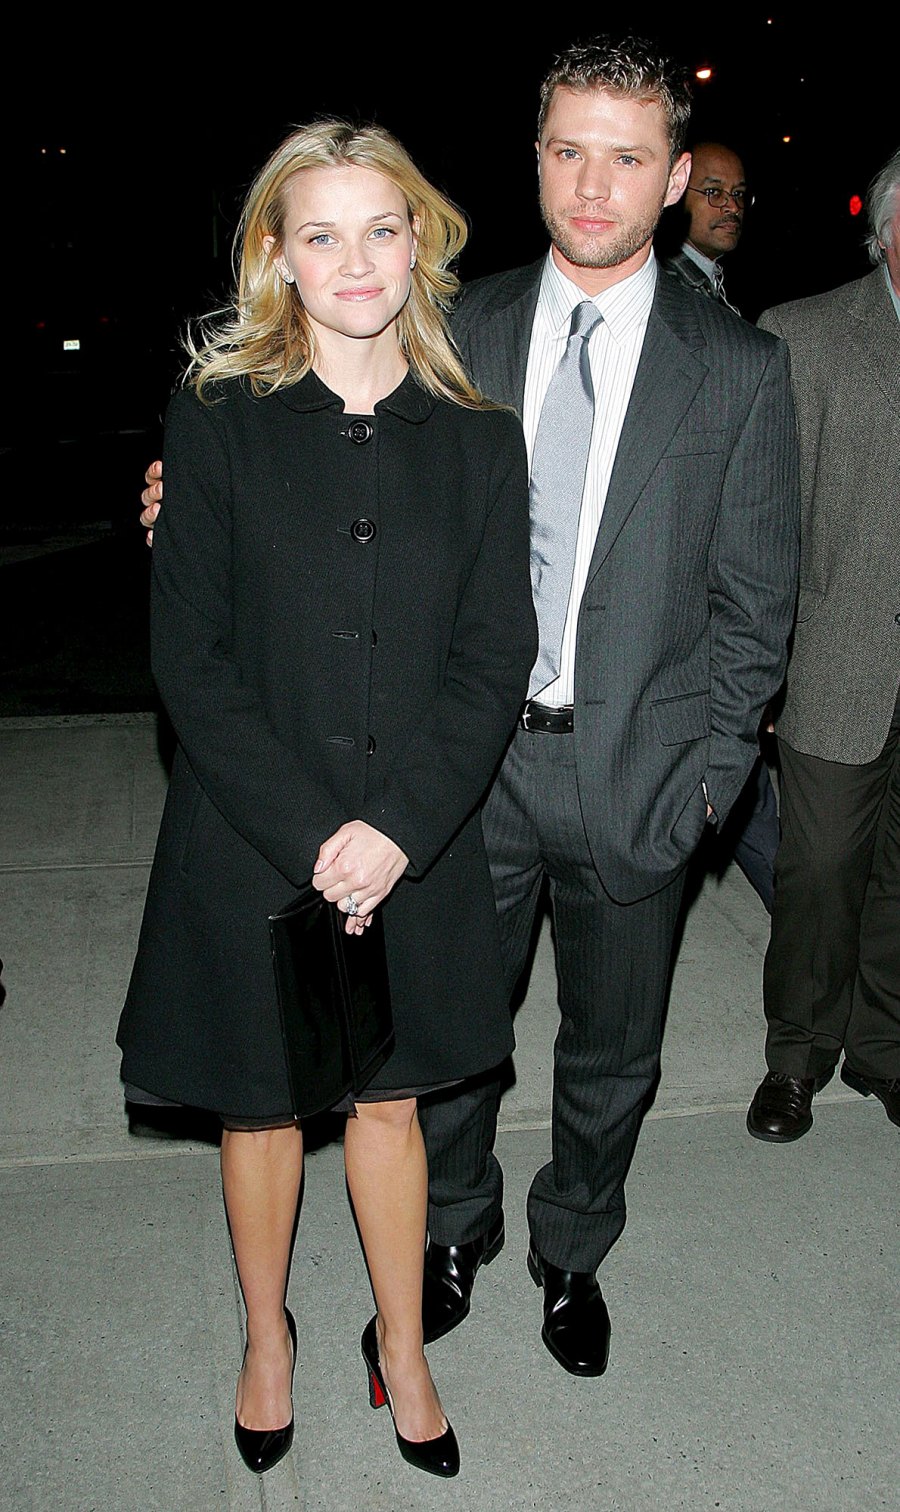 2007 Divorce Final Reese Witherspoon and Ryan Phillippe Ups and Downs